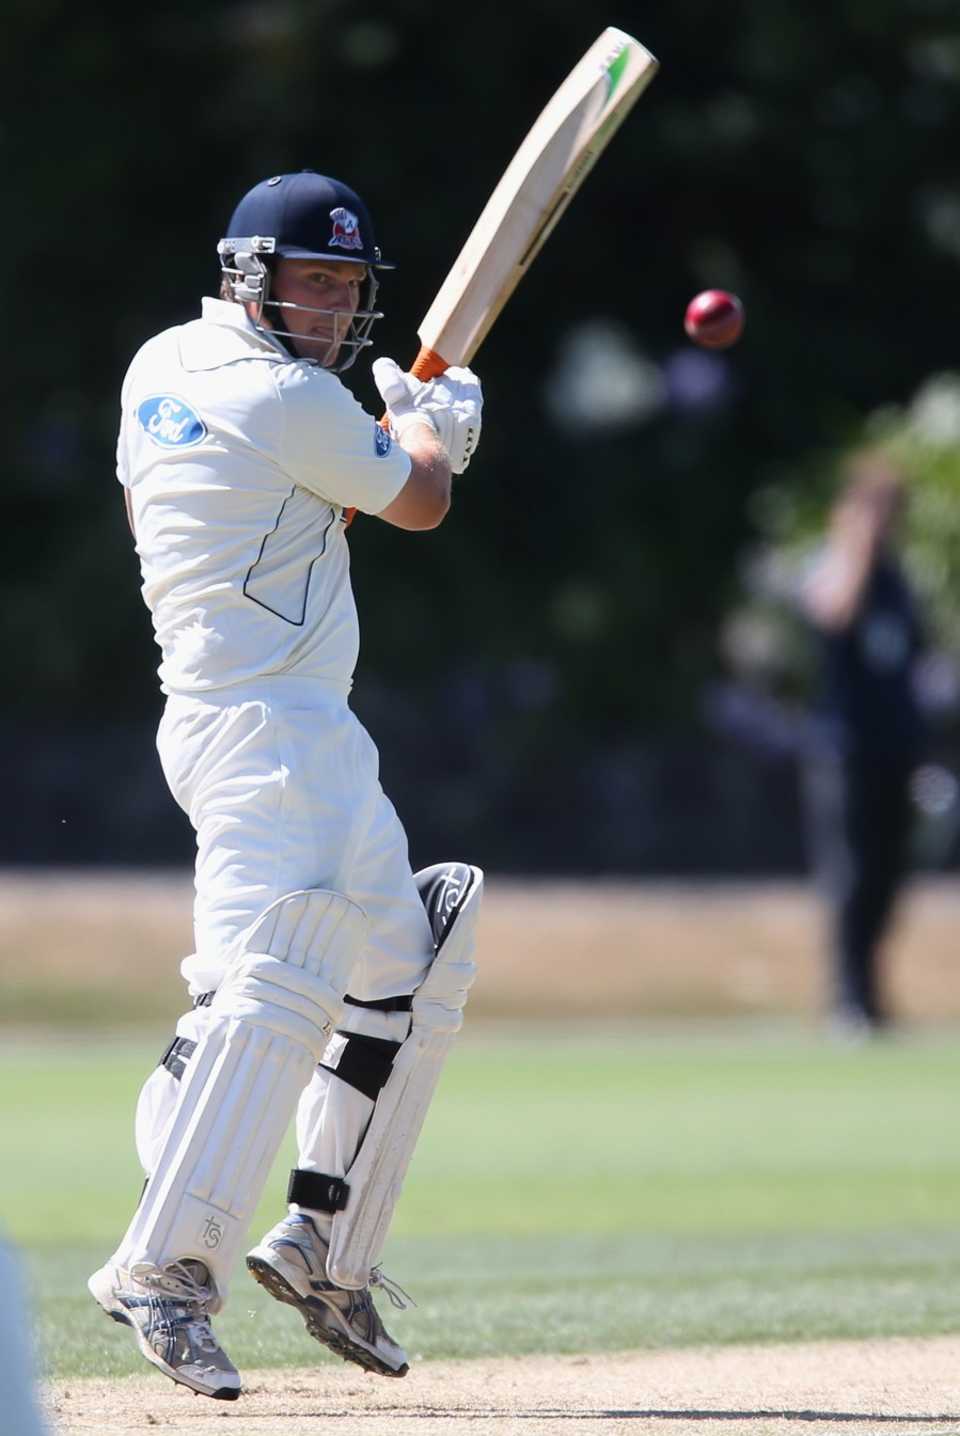 Michael Guptill-Bunce cuts behind square, Auckland v Central Districts, Plunket Shield, Auckland, January 30, 2013